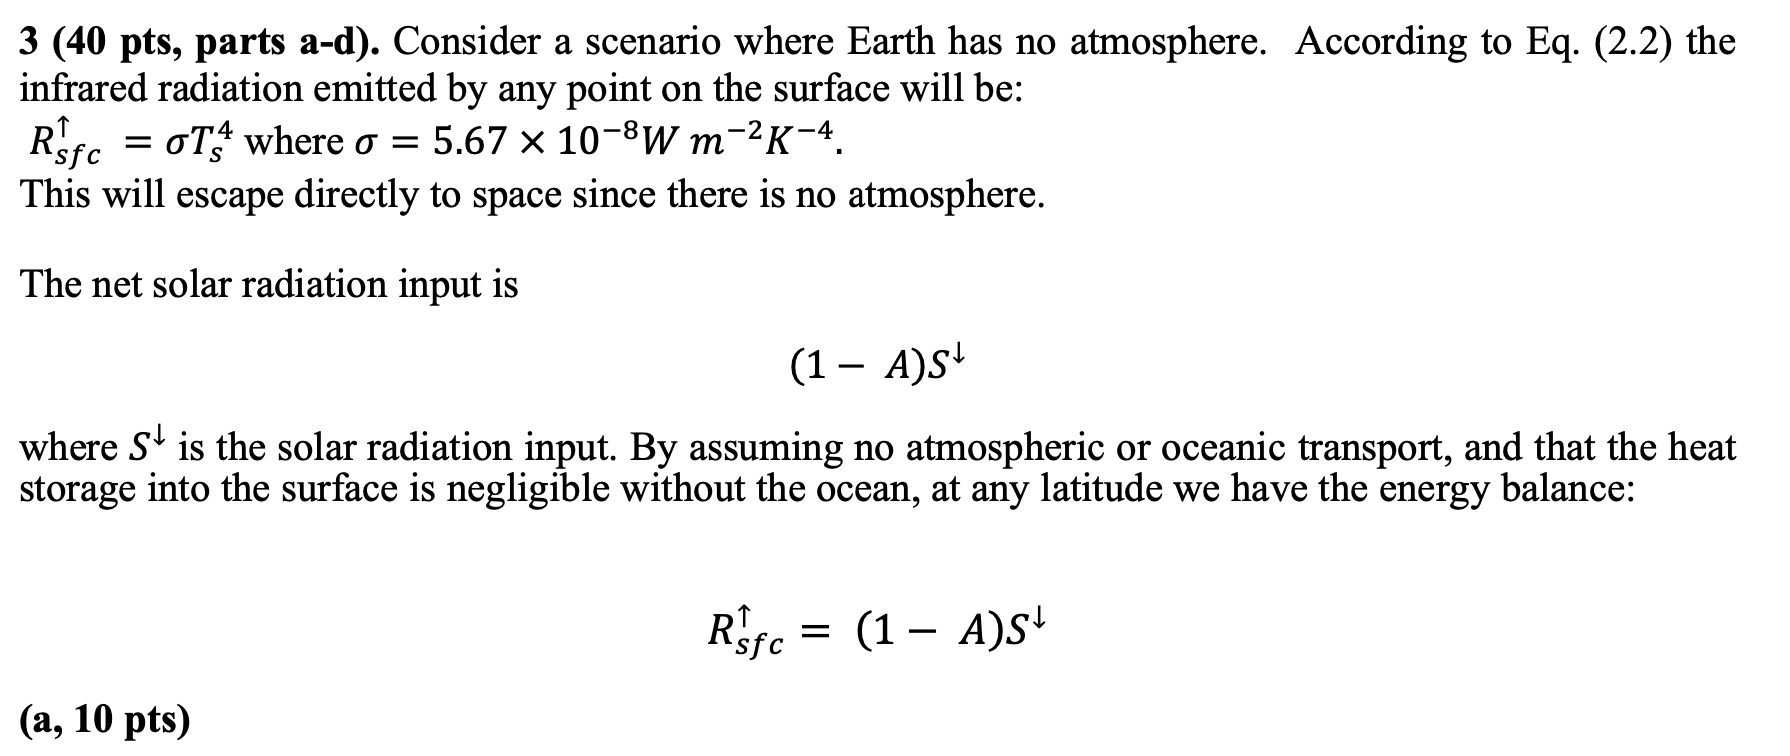 3 (40 pts, parts a-d). Consider a scenario where Earth has no atmosphere. According to Eq. (2.2) the infrared radiation emitt